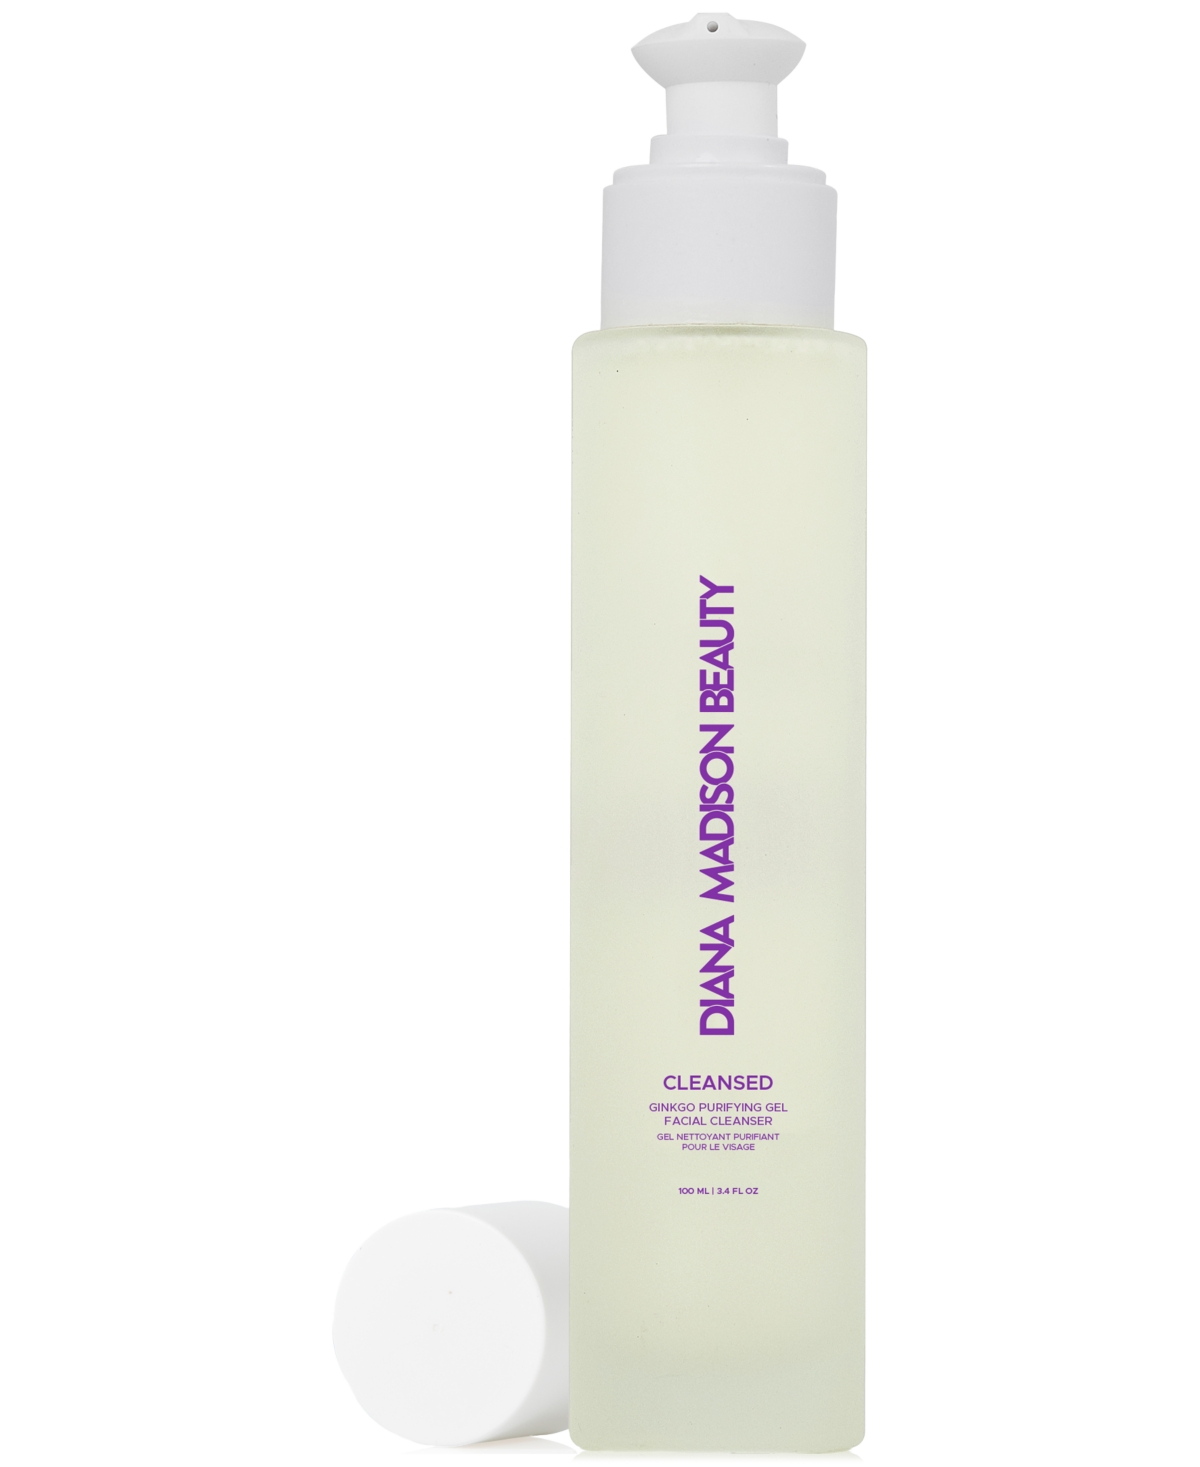 Diana Madison Beauty Cleansed Ginkgo Purifying Gel Facial Cleanser